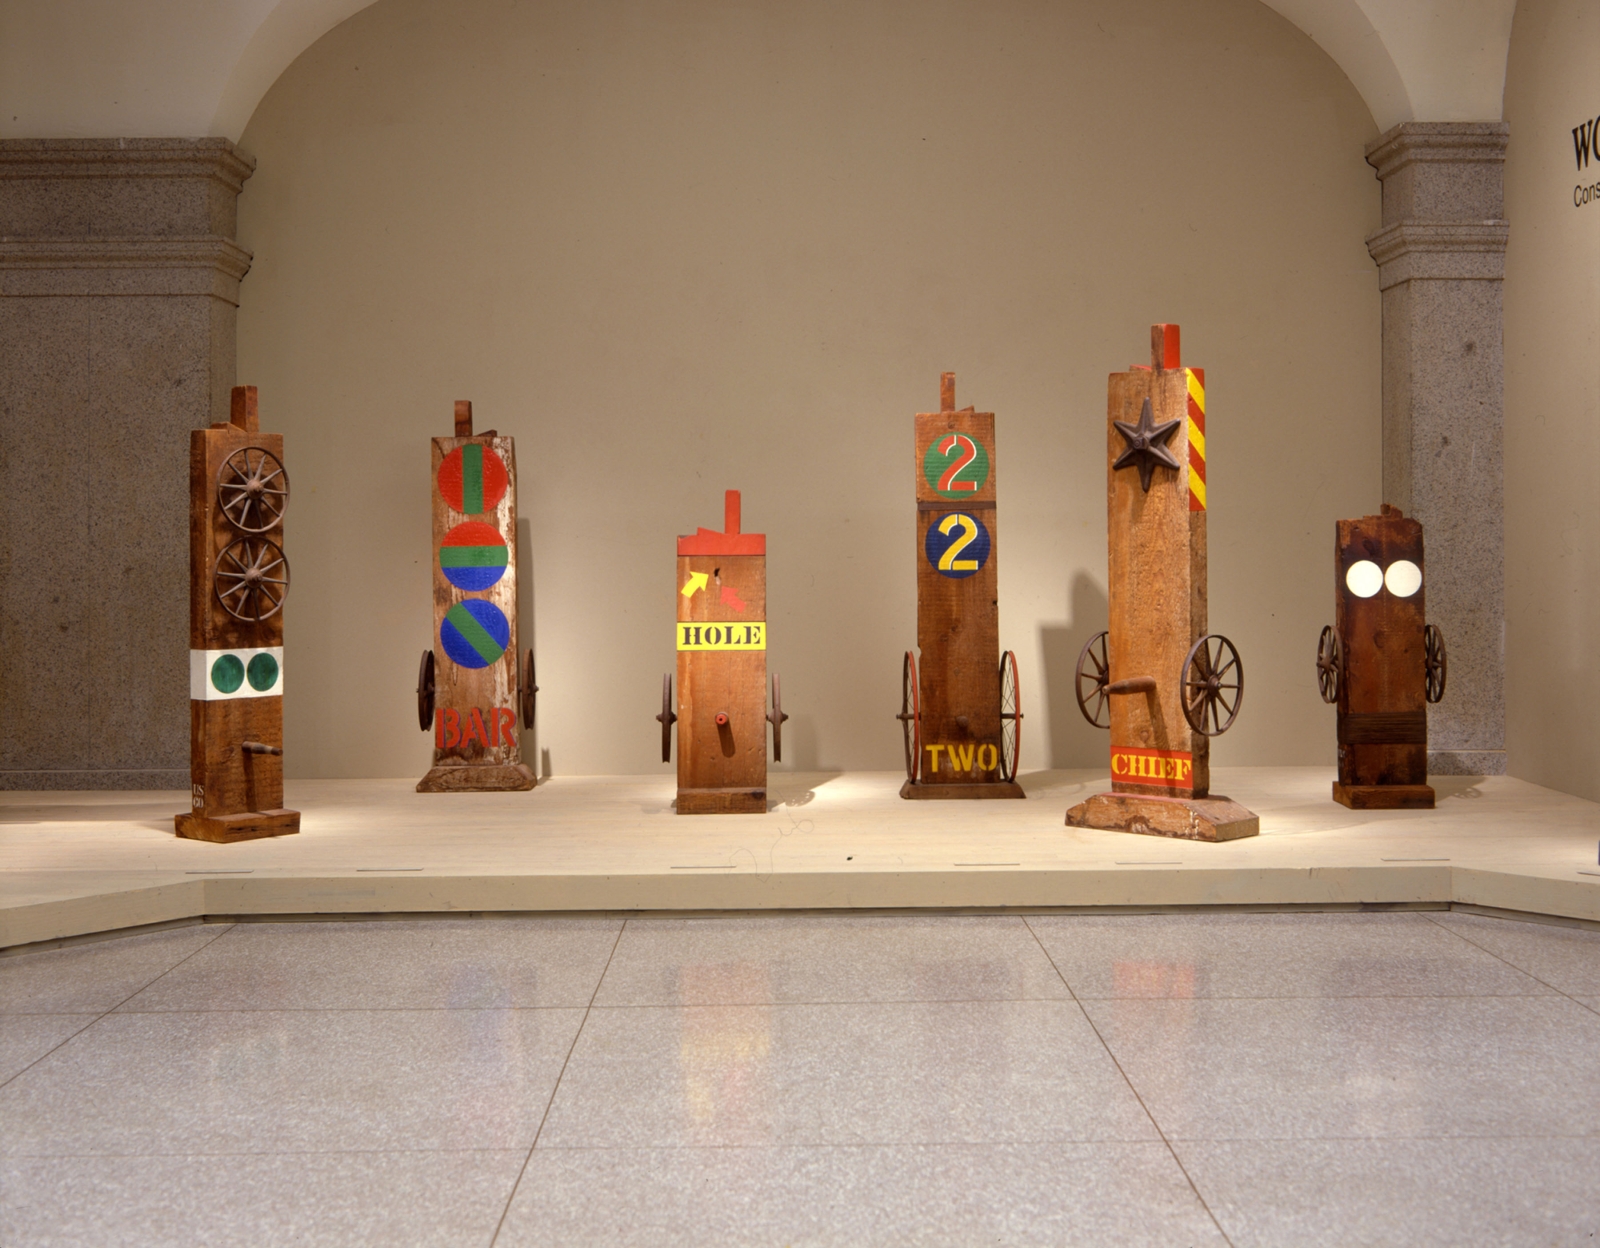 Installation view of Robert Indiana: Wood Works, National Museum of American Art, Washington, D.C., May 1&ndash;September 3, 1984; left to right: Ge (1960), Bar (1960), Hole (1960), Two (1962), Chief (1962), and Virgin (1960) . Photograph Archives, Smithsonian American Art Museum